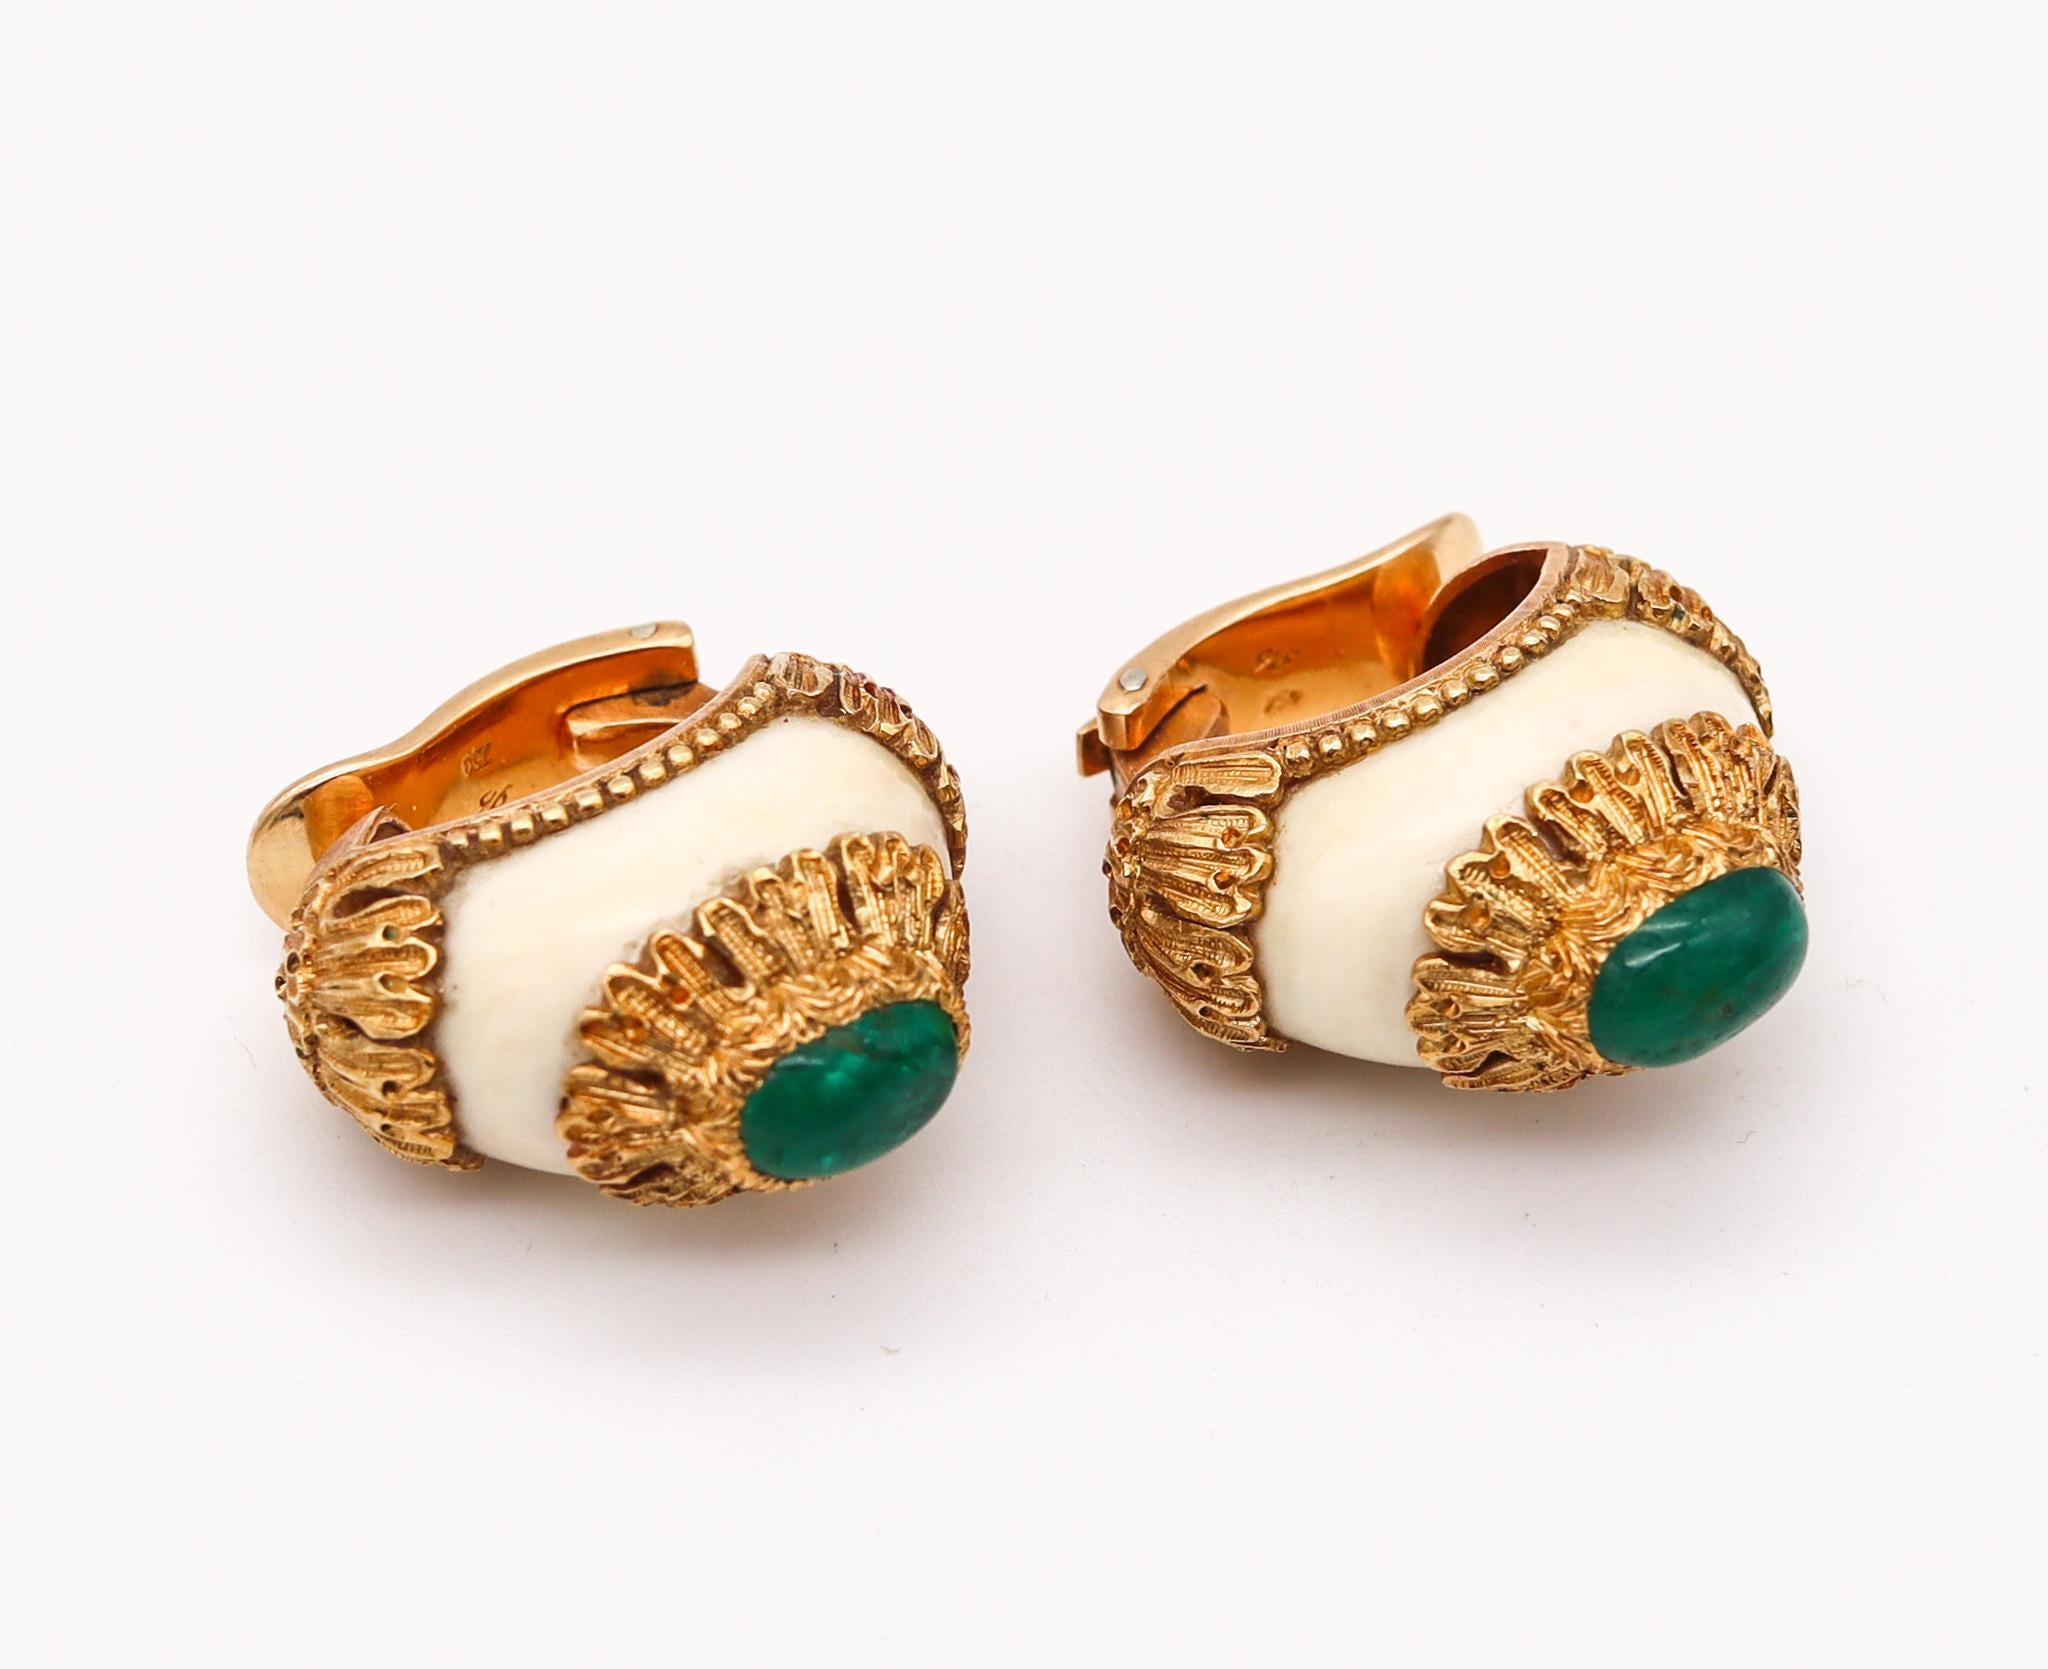 Baroque Mario Buccellati 1970 Clips Earrings in 18Kt Yellow Gold with 2.62 Ctw Emeralds